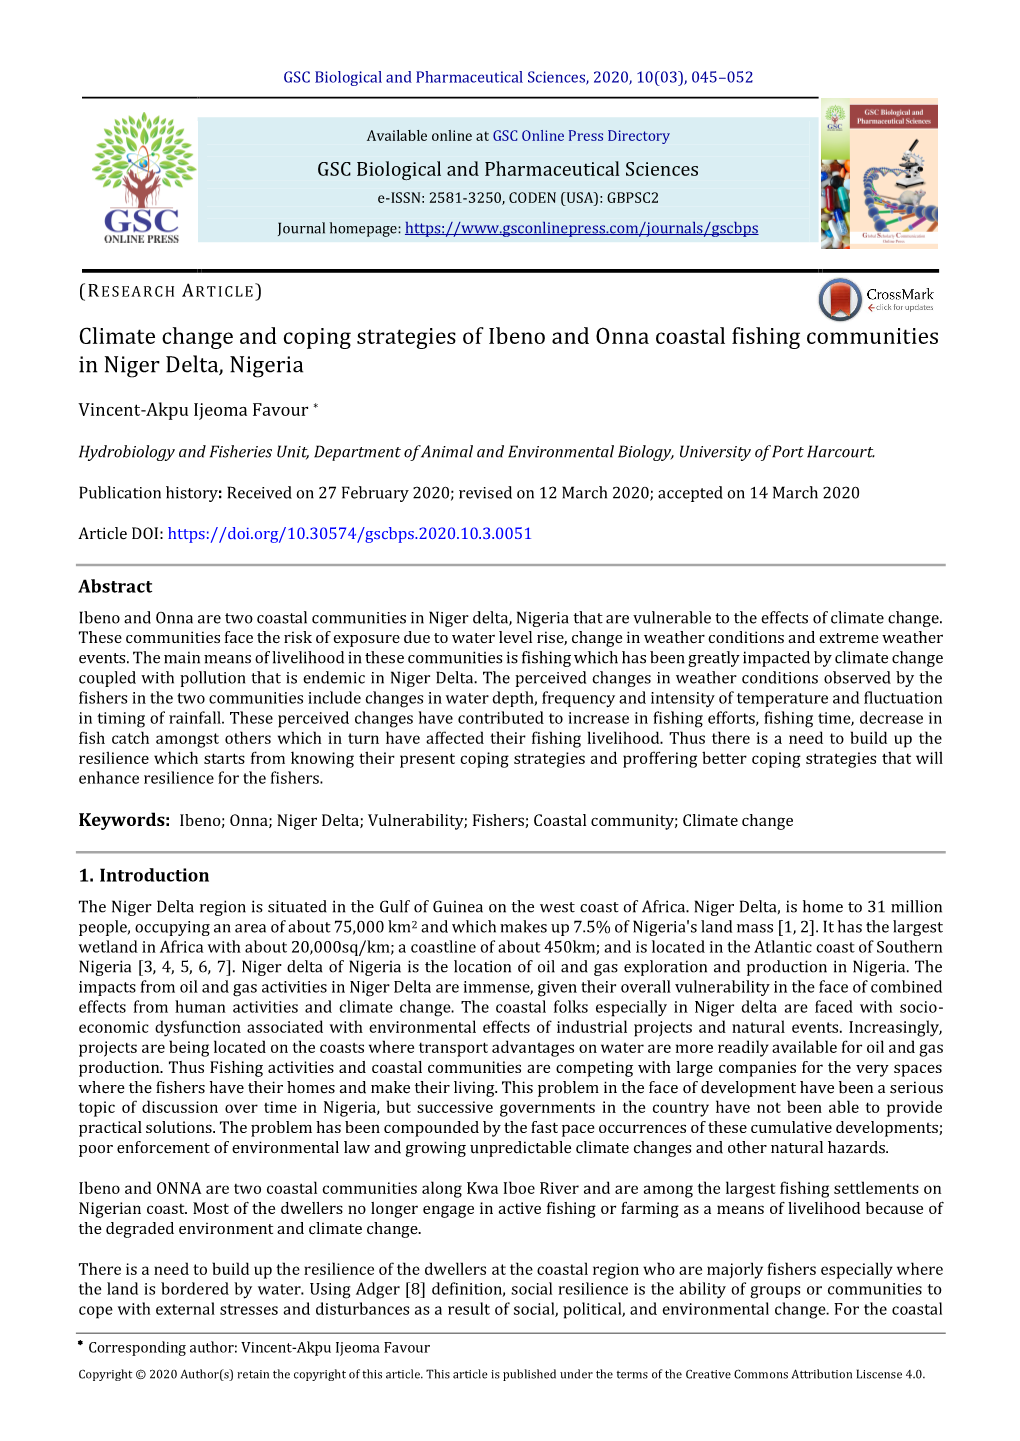 Climate Change and Coping Strategies of Ibeno and Onna Coastal Fishing Communities in Niger Delta, Nigeria